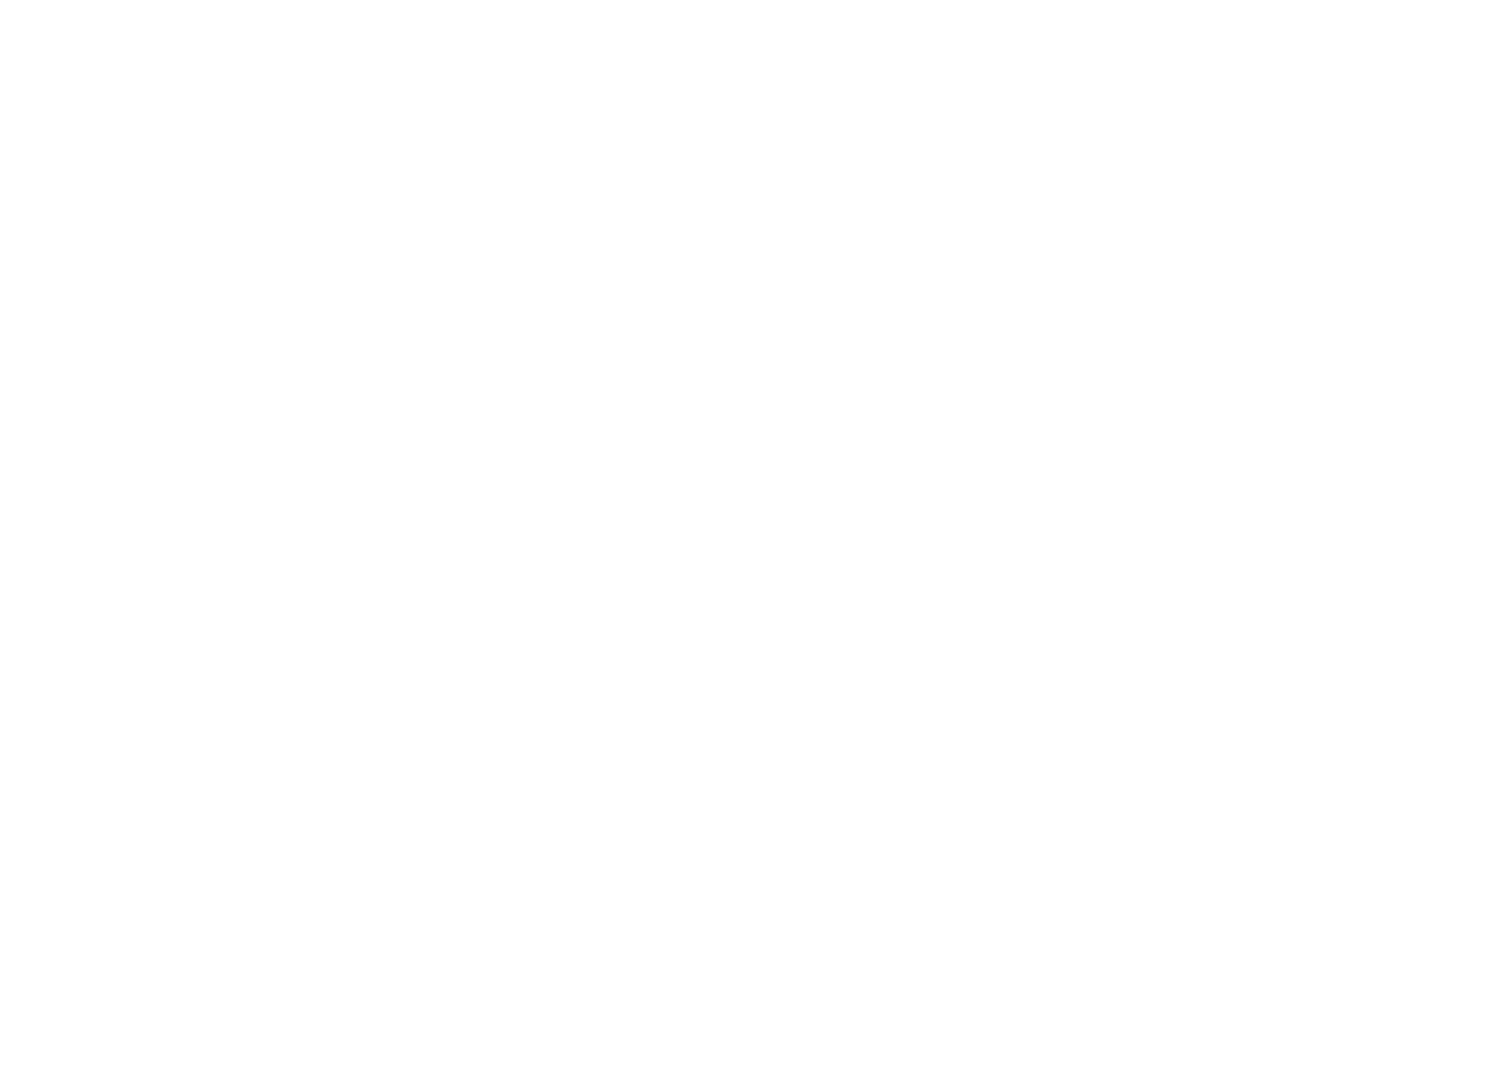 North Marsh Guide Co